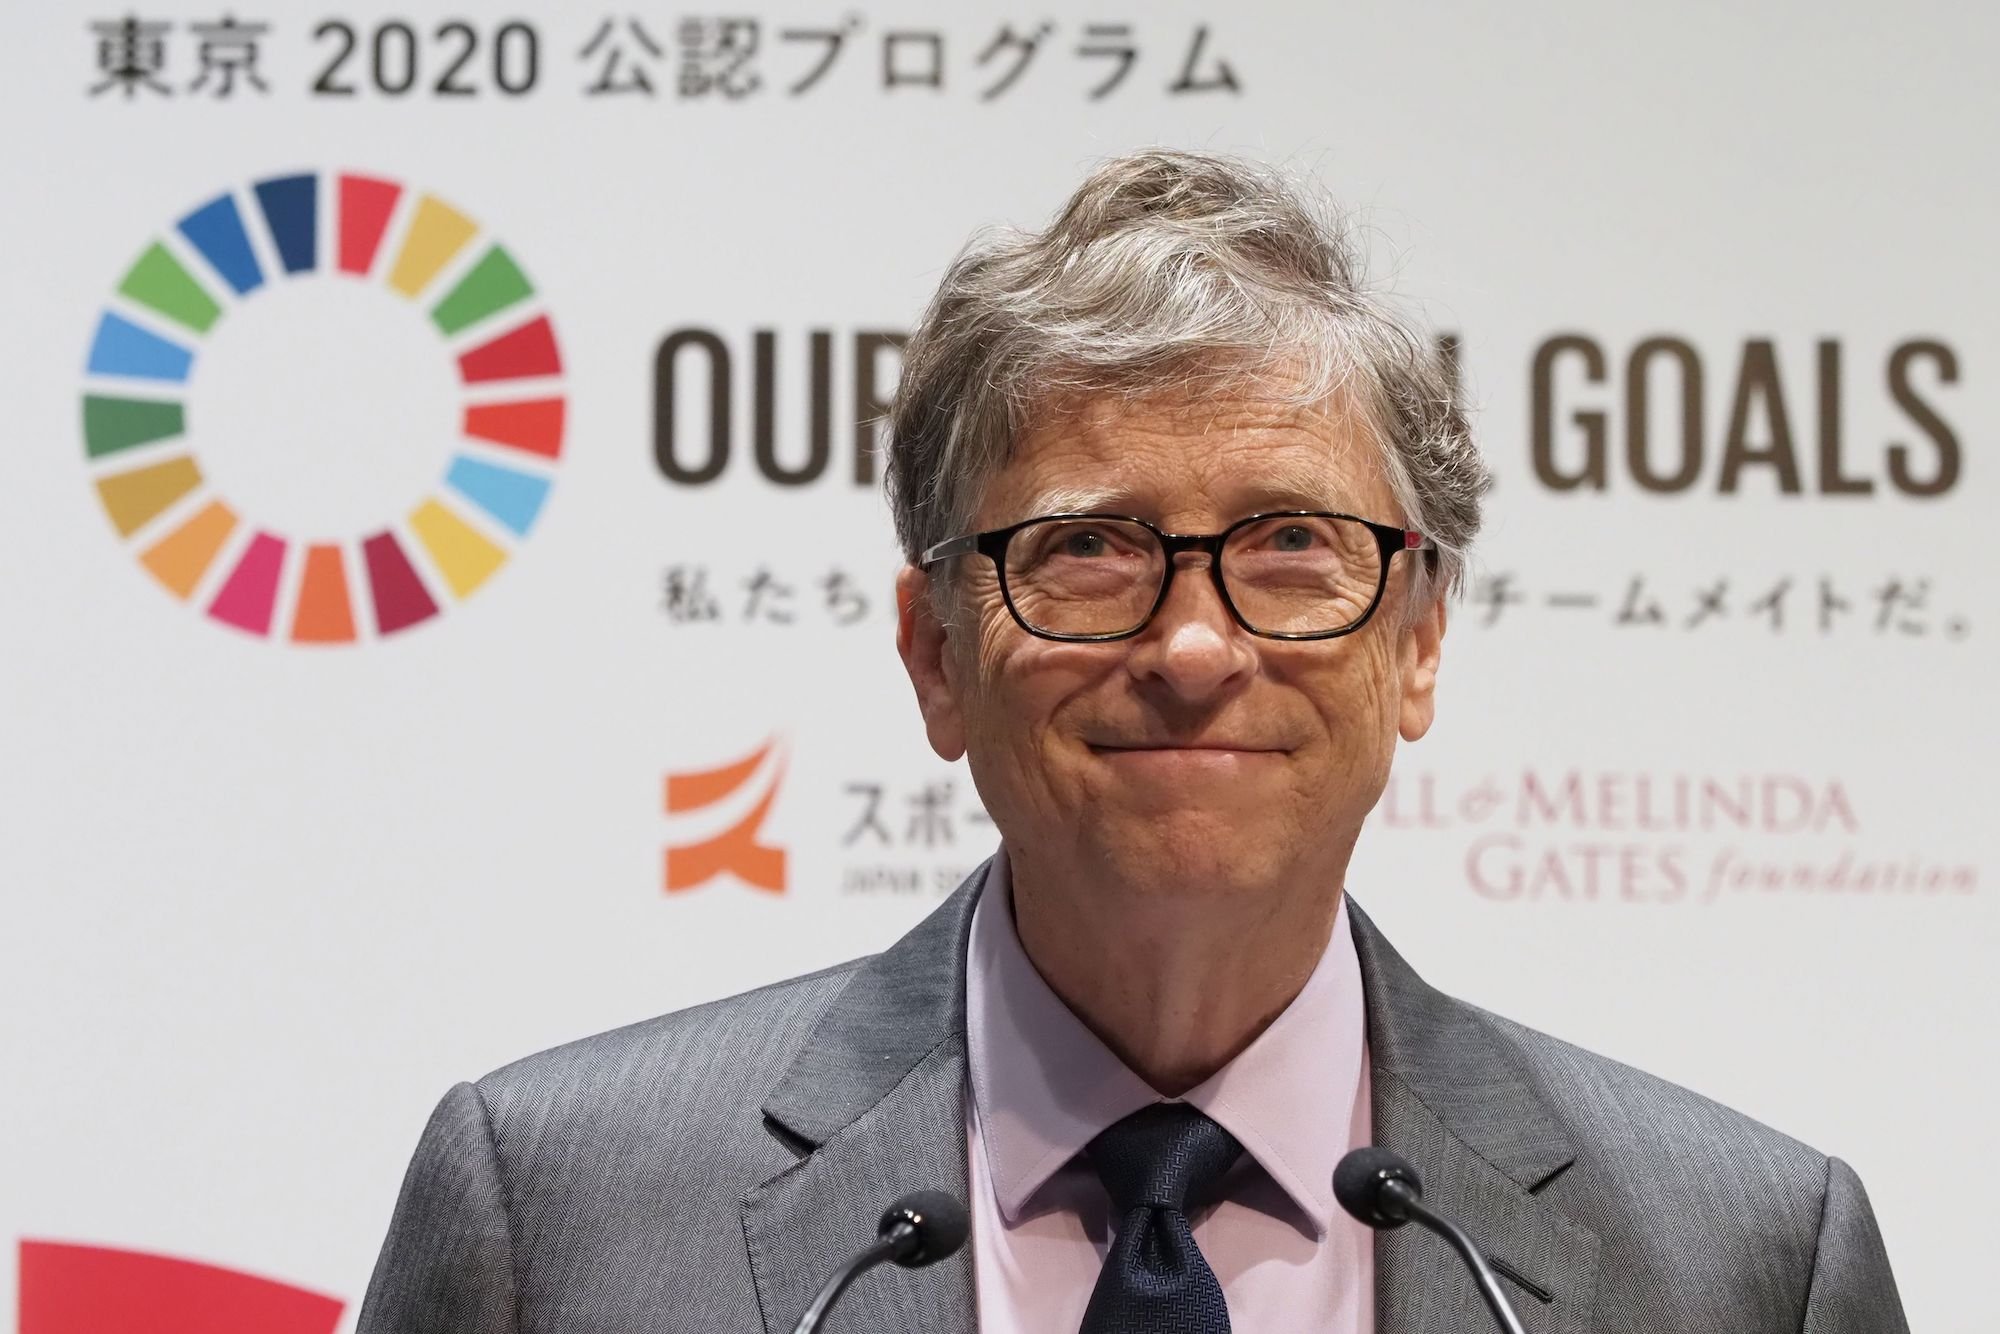 Bill Gates in front of a white and multi color background